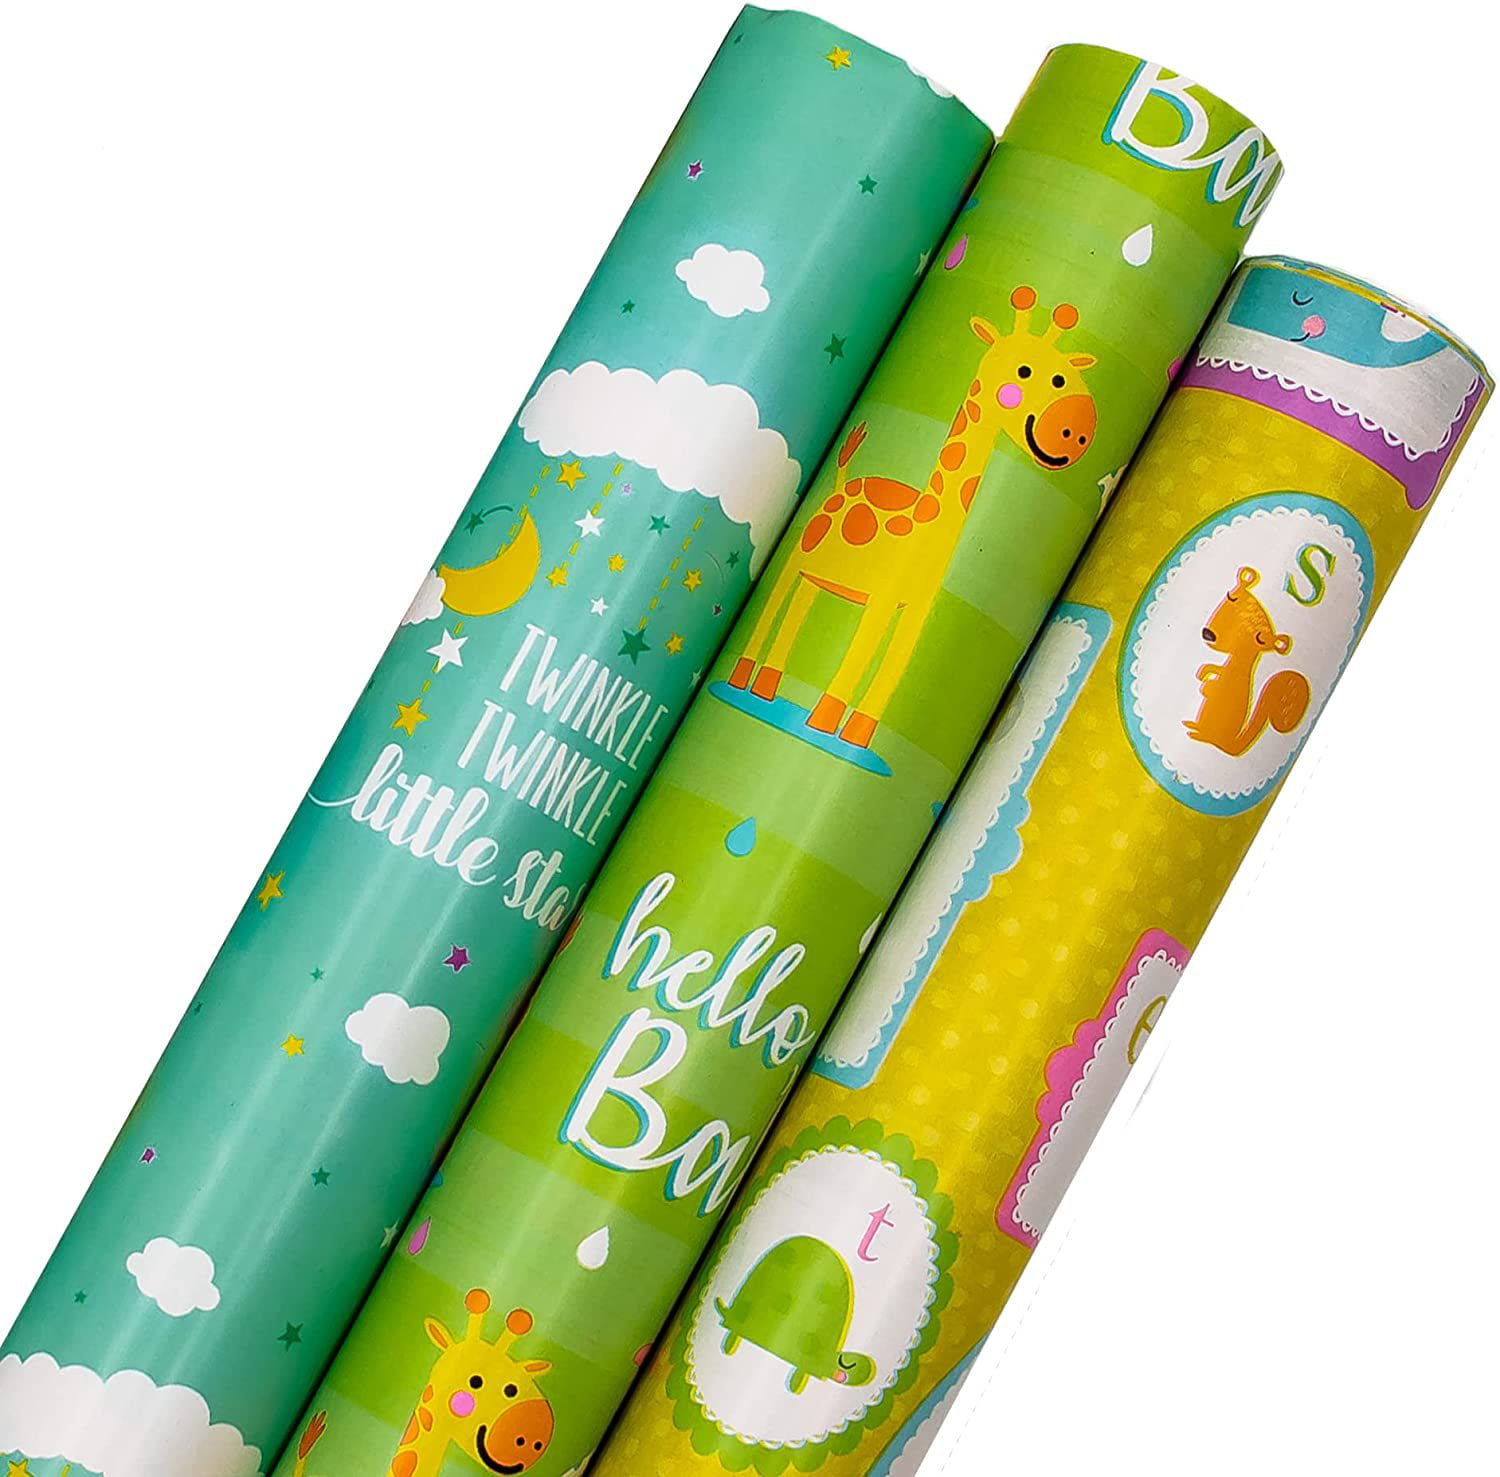  CENTRAL 23 Baby Shower Wrapping Paper Neutral - 6 White Gift  Wrap Sheet - Musical Animals - Birthday Wrapping Paper Girls Boys Kids -  Comes With Fun Stickers : Health & Household